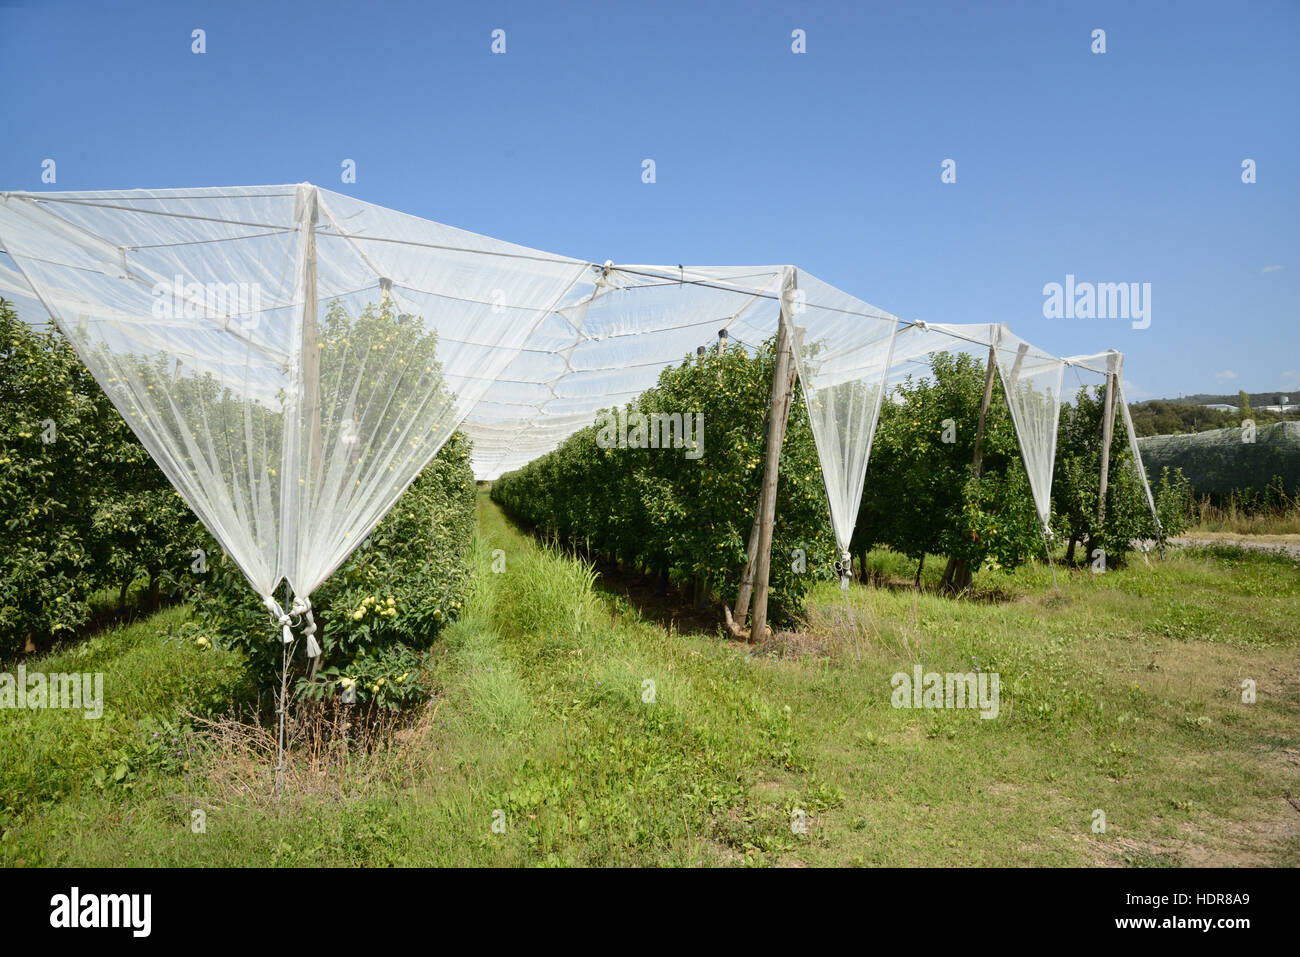 Crop Protection of Intensive Fruit Production or Apple Trees in the Durance Valley near Manosque Provence France Stock Photo